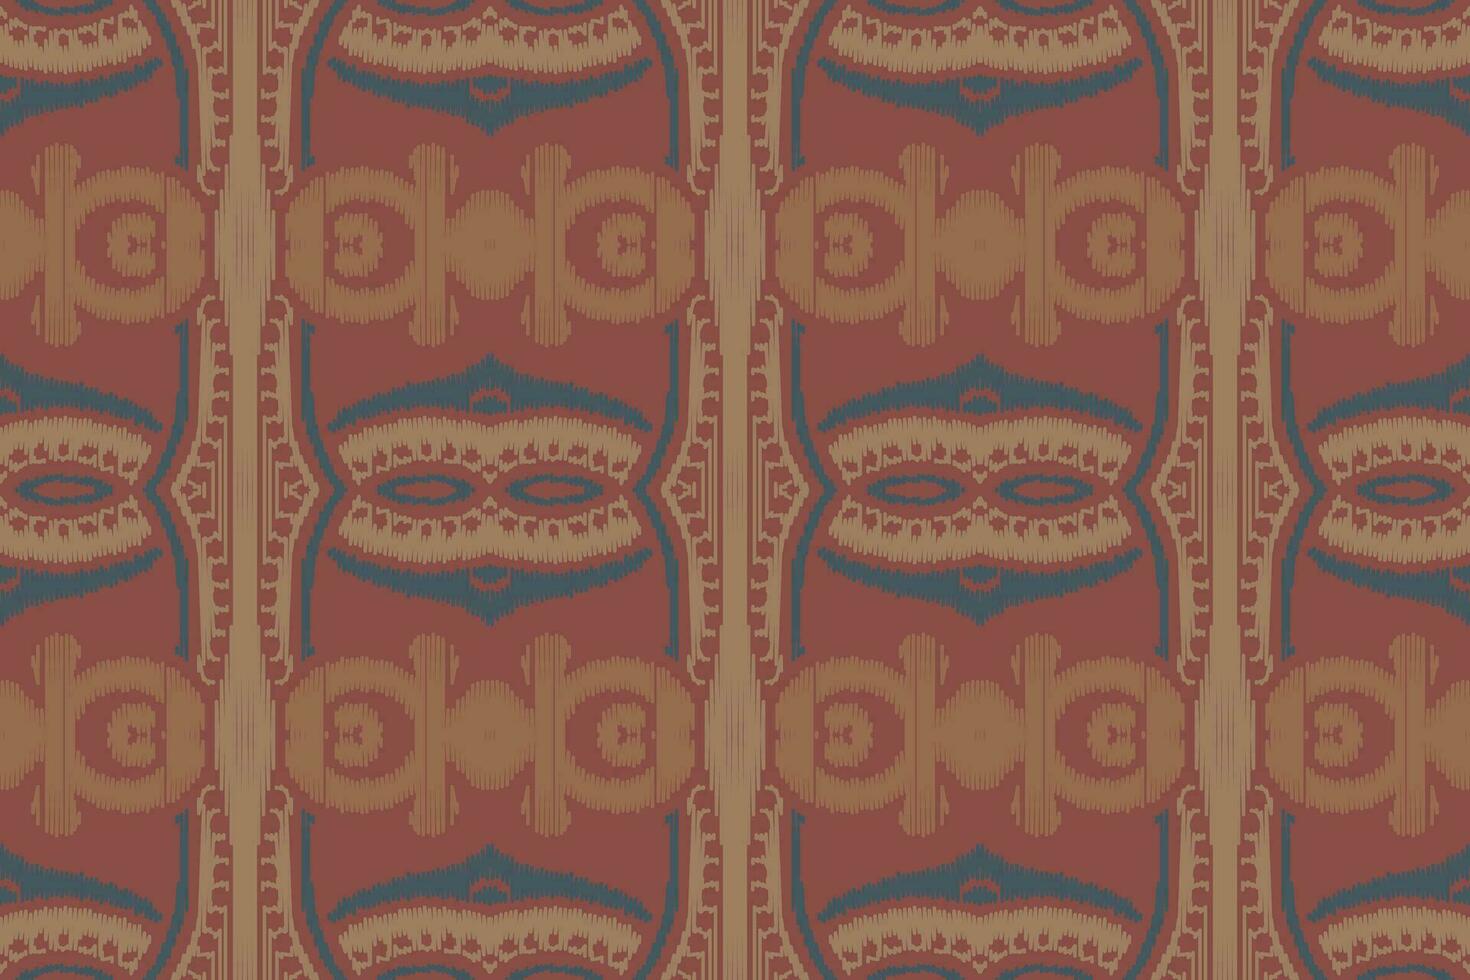 Ikat Damask Paisley Embroidery Background. Ikat Patterns Geometric Ethnic Oriental Pattern traditional.aztec Style Abstract Vector illustration.design for Texture,fabric,clothing,wrapping,sarong.